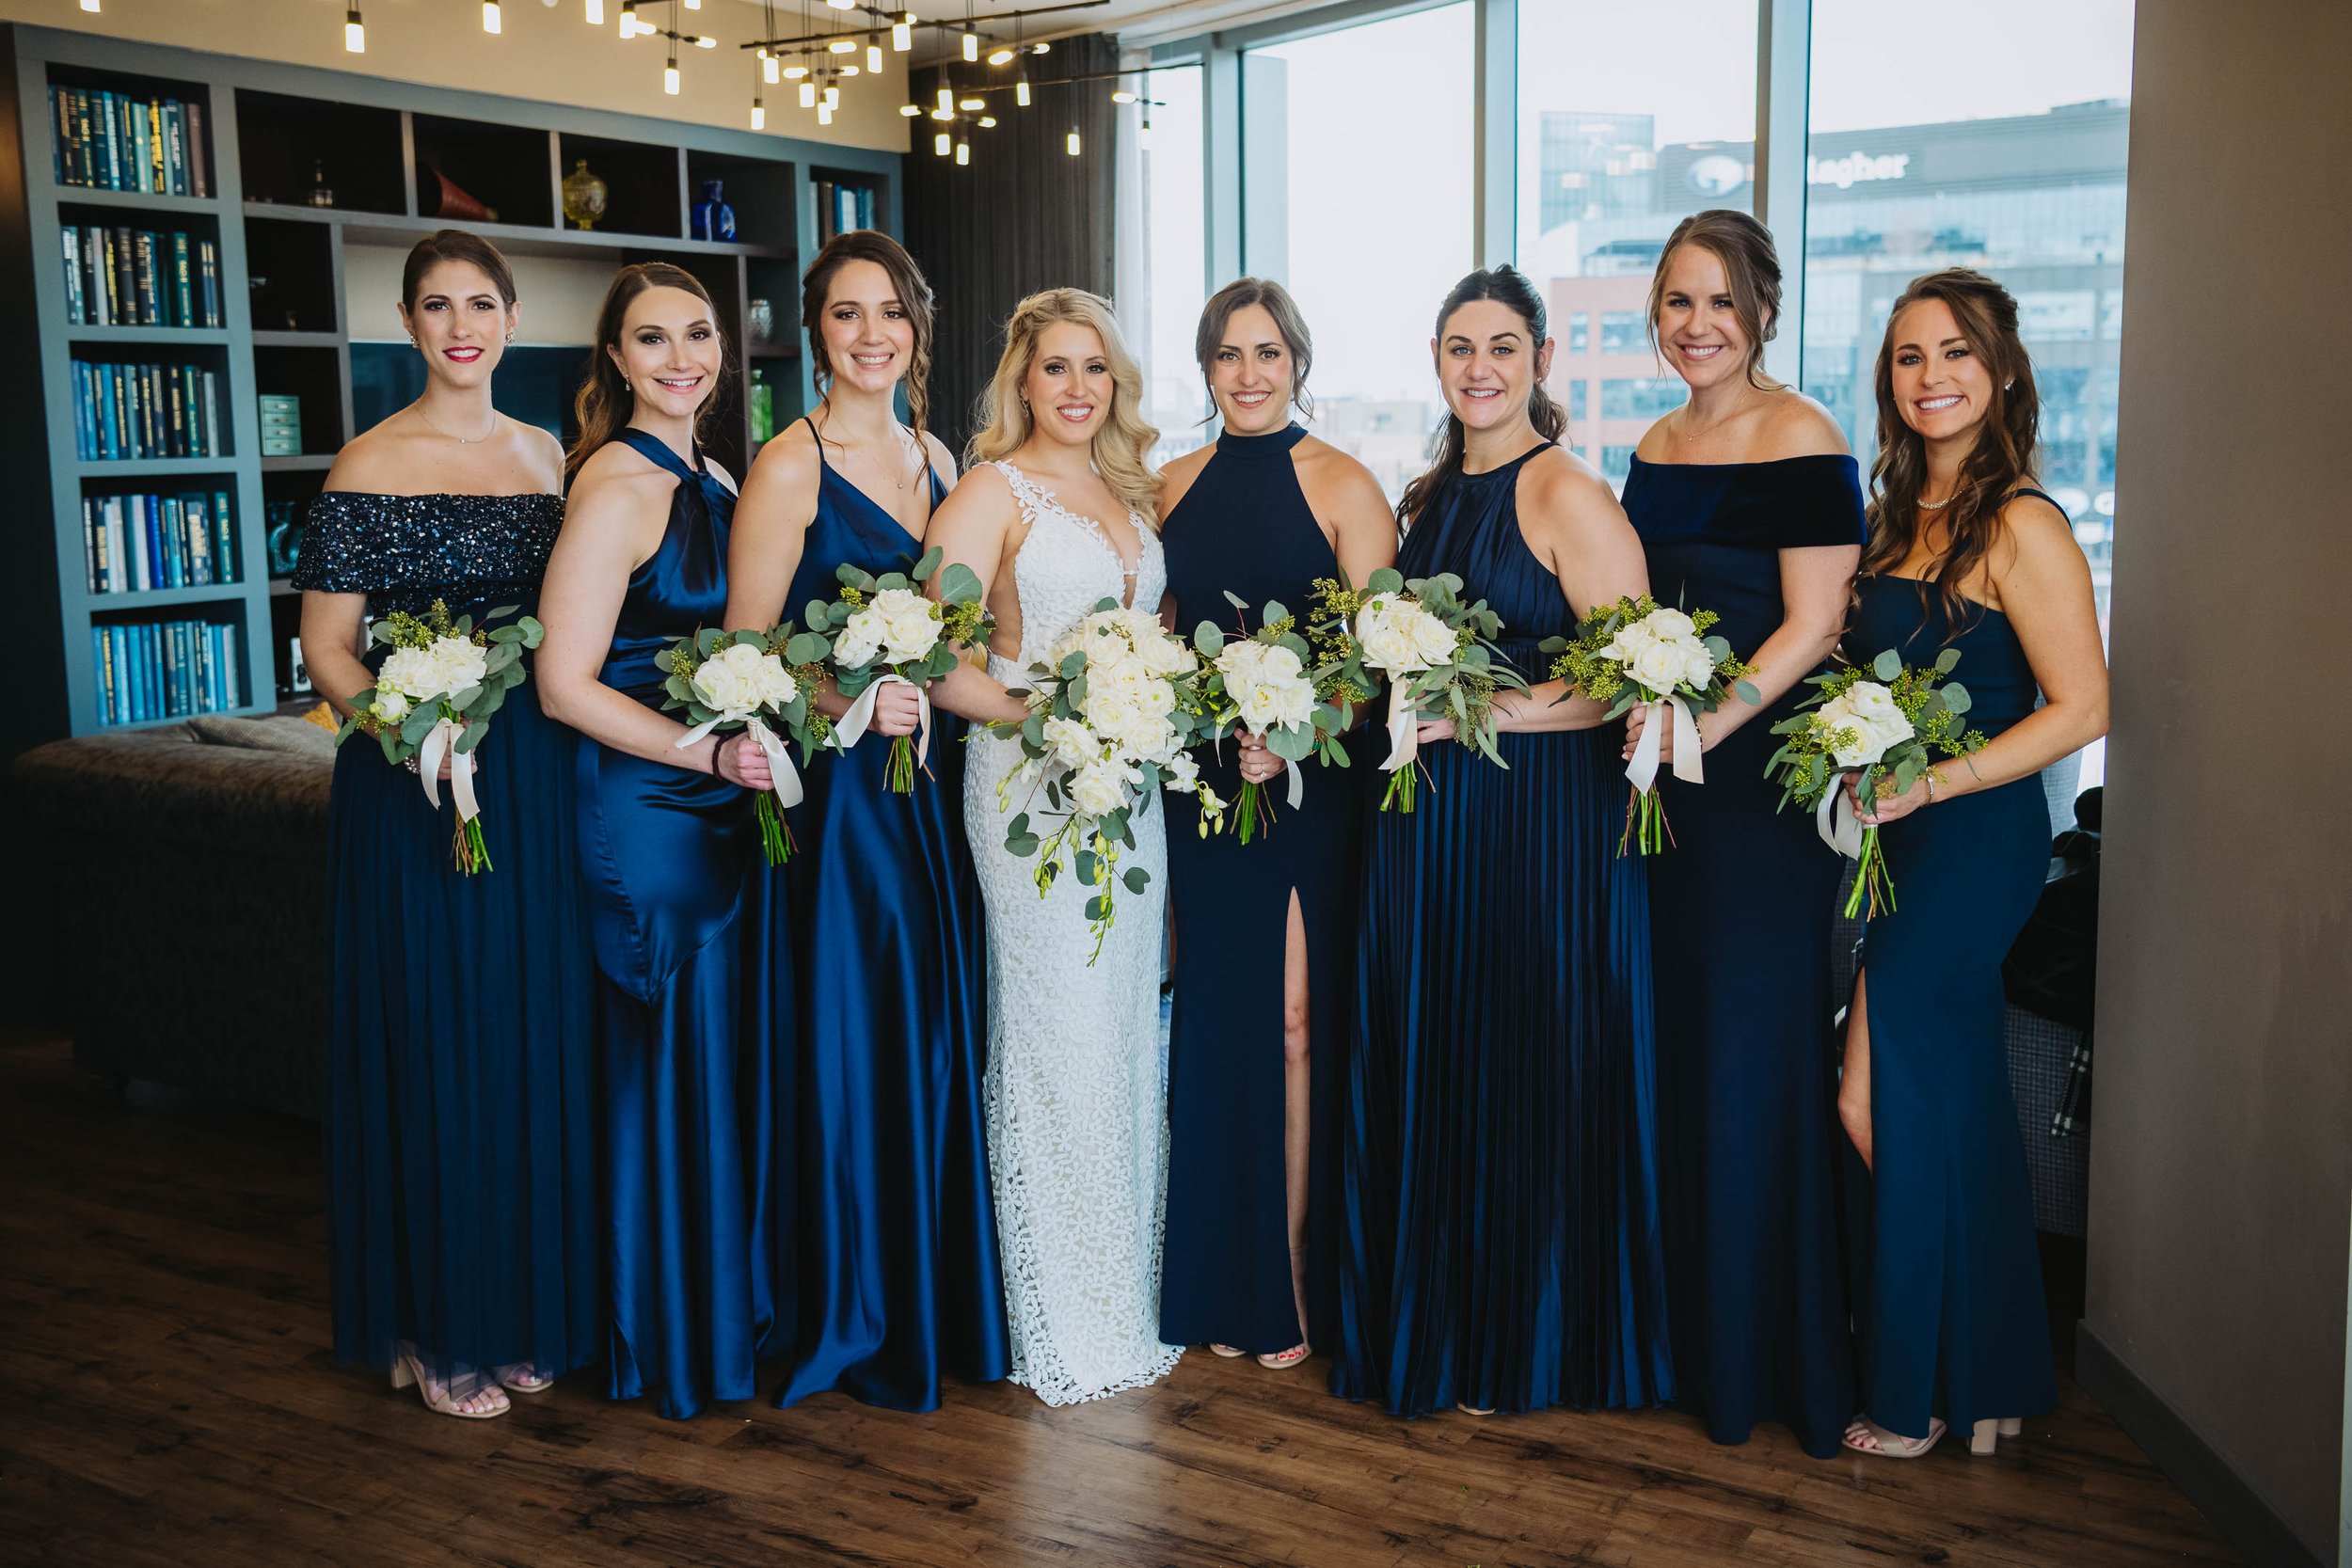 Wedding Day Photos | Ravenswood Event Center | J. Brown Photography | portrait of bride and wedding party Hotel Zachary